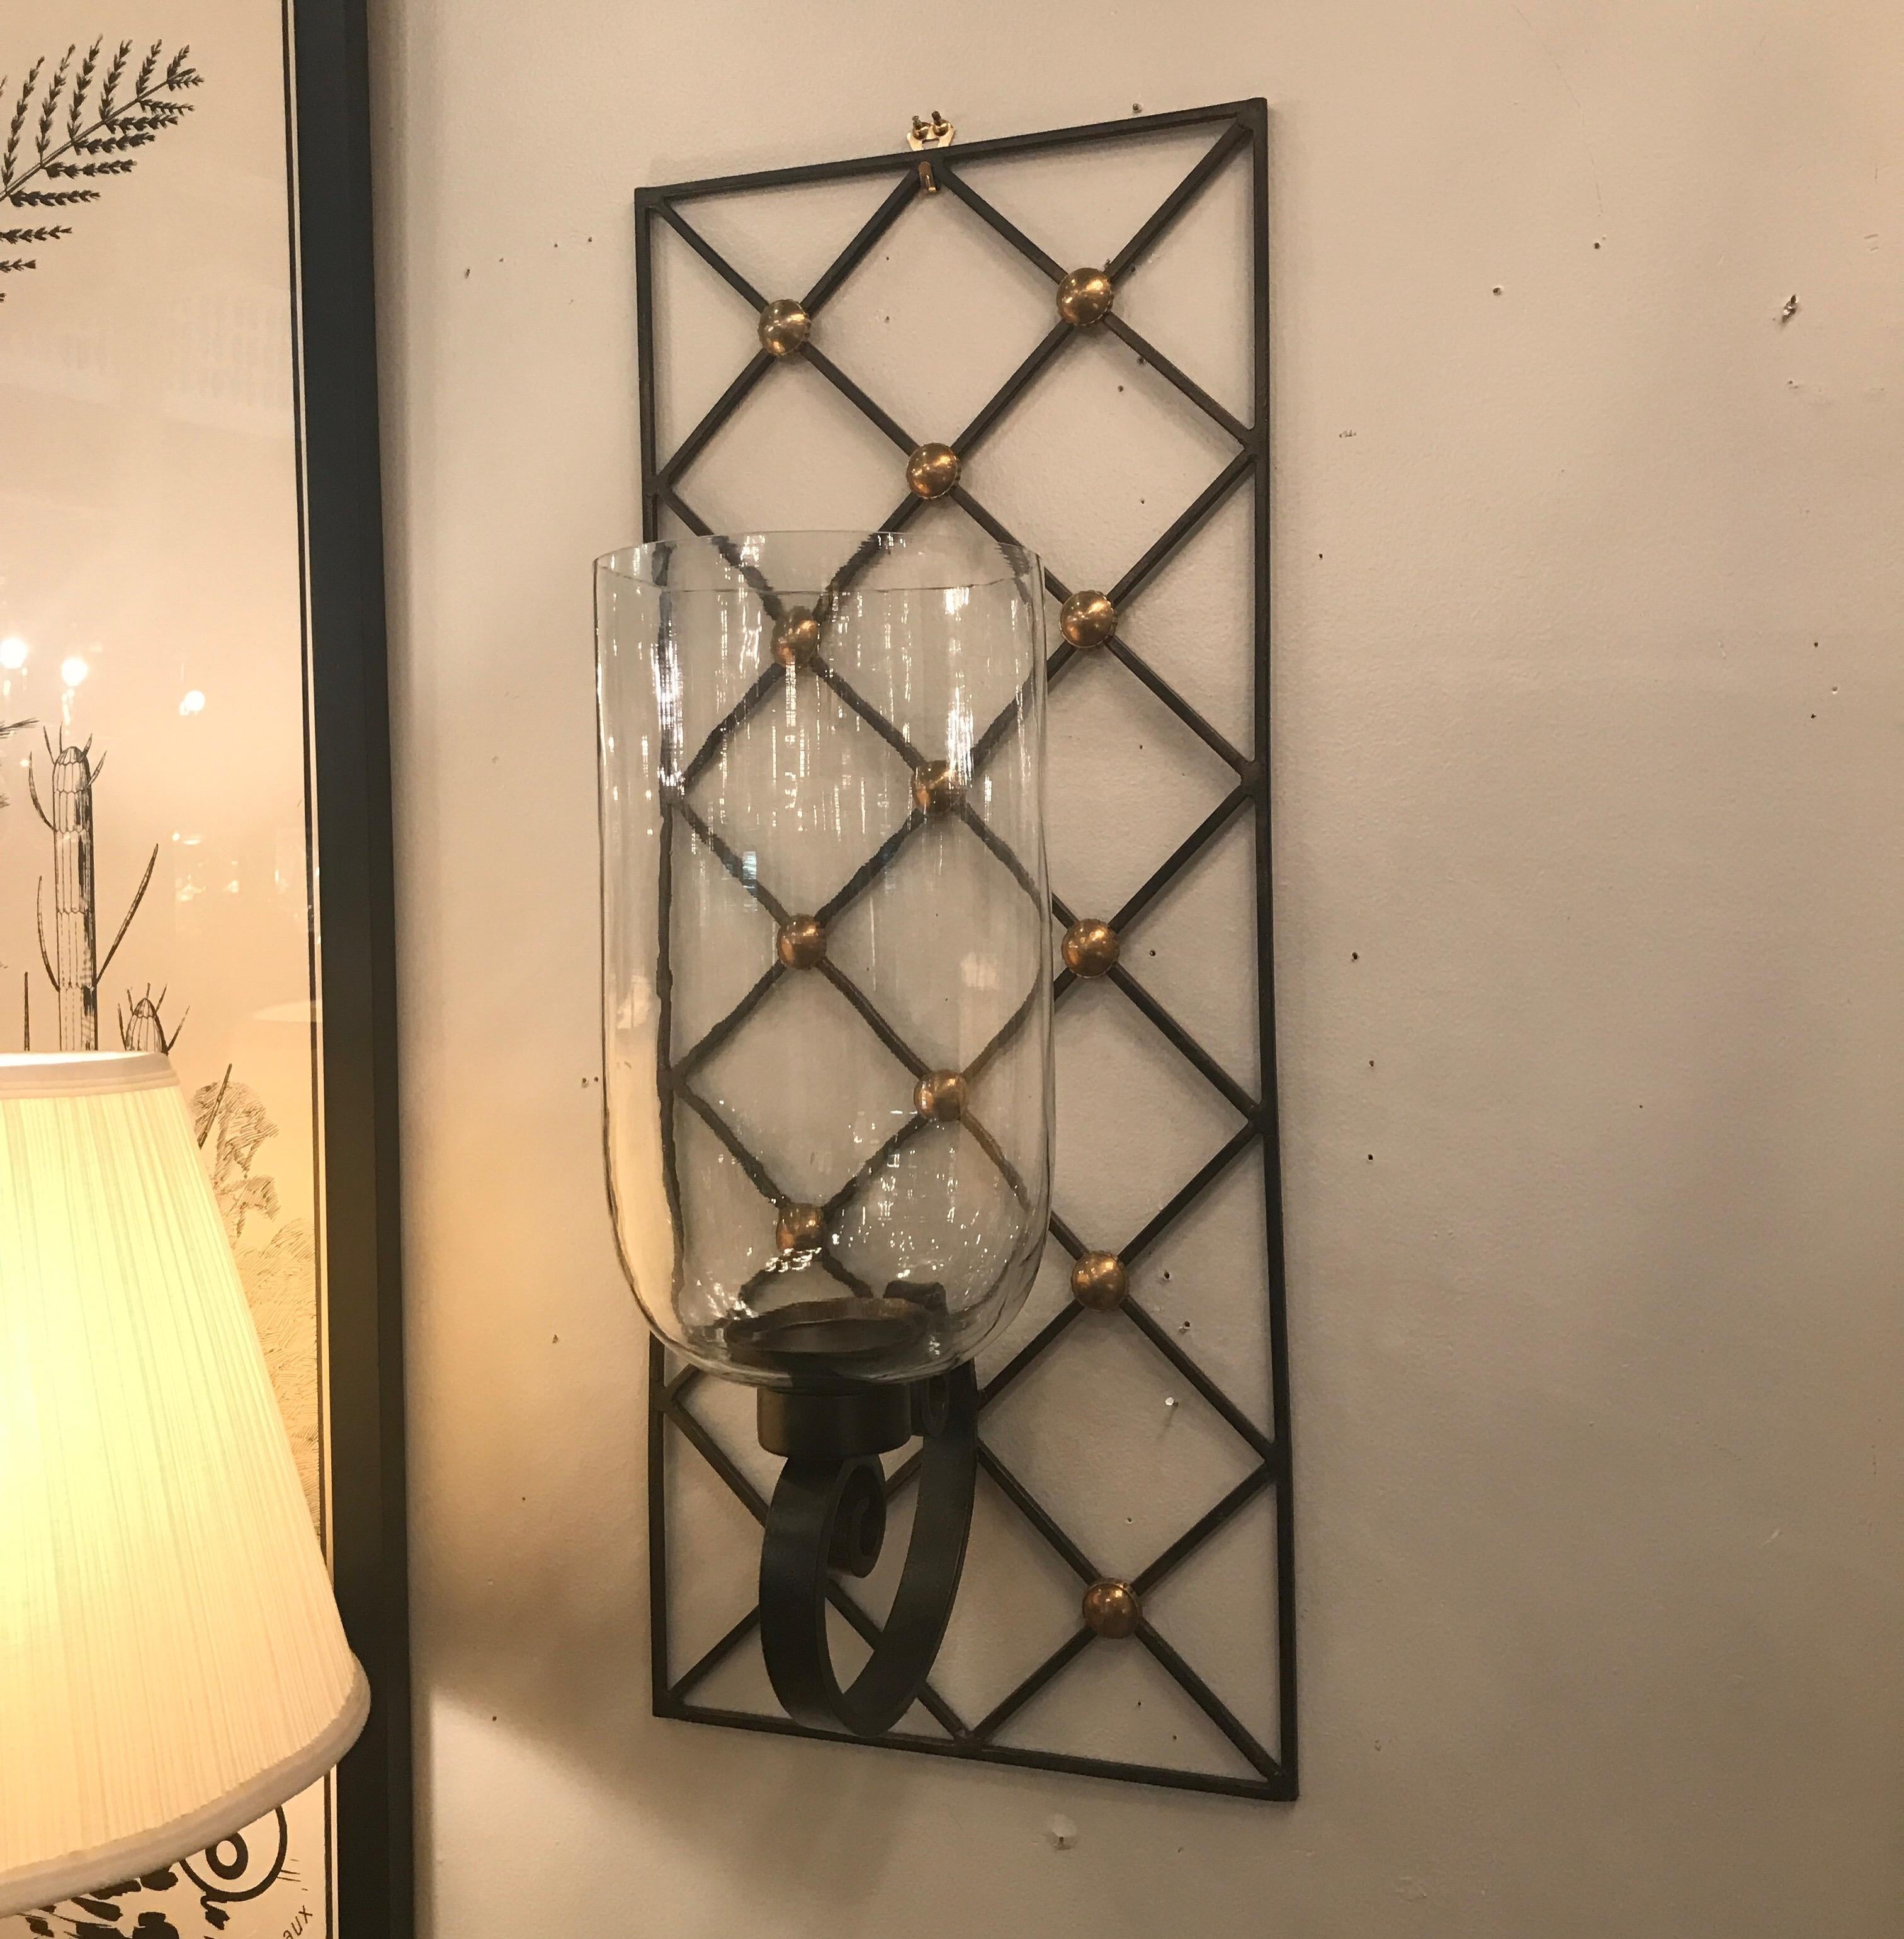 A pair of Iron, glass and brass wall sconces with hurricane shades in the manner of Jean Royère. The lattice backs with brass details and blown glass hurricane shades in a large-scale. These are candles sconces and can be used to enhance any room.